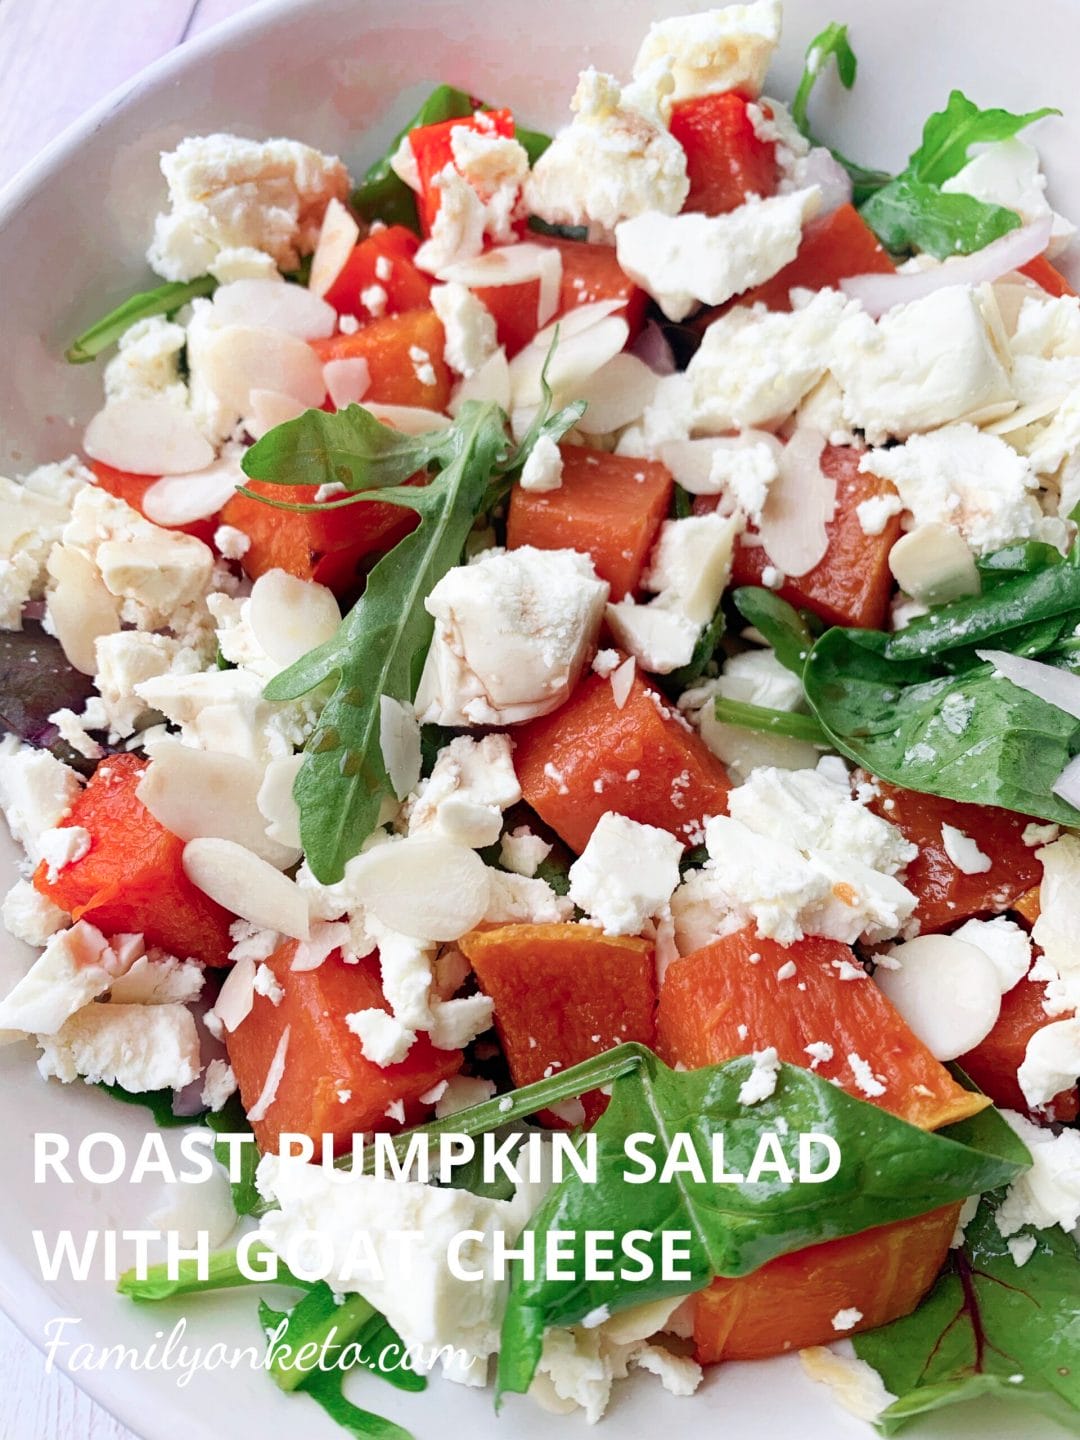 Picture of bowl of leafy green salad with roasted pumpkin and feta cheese